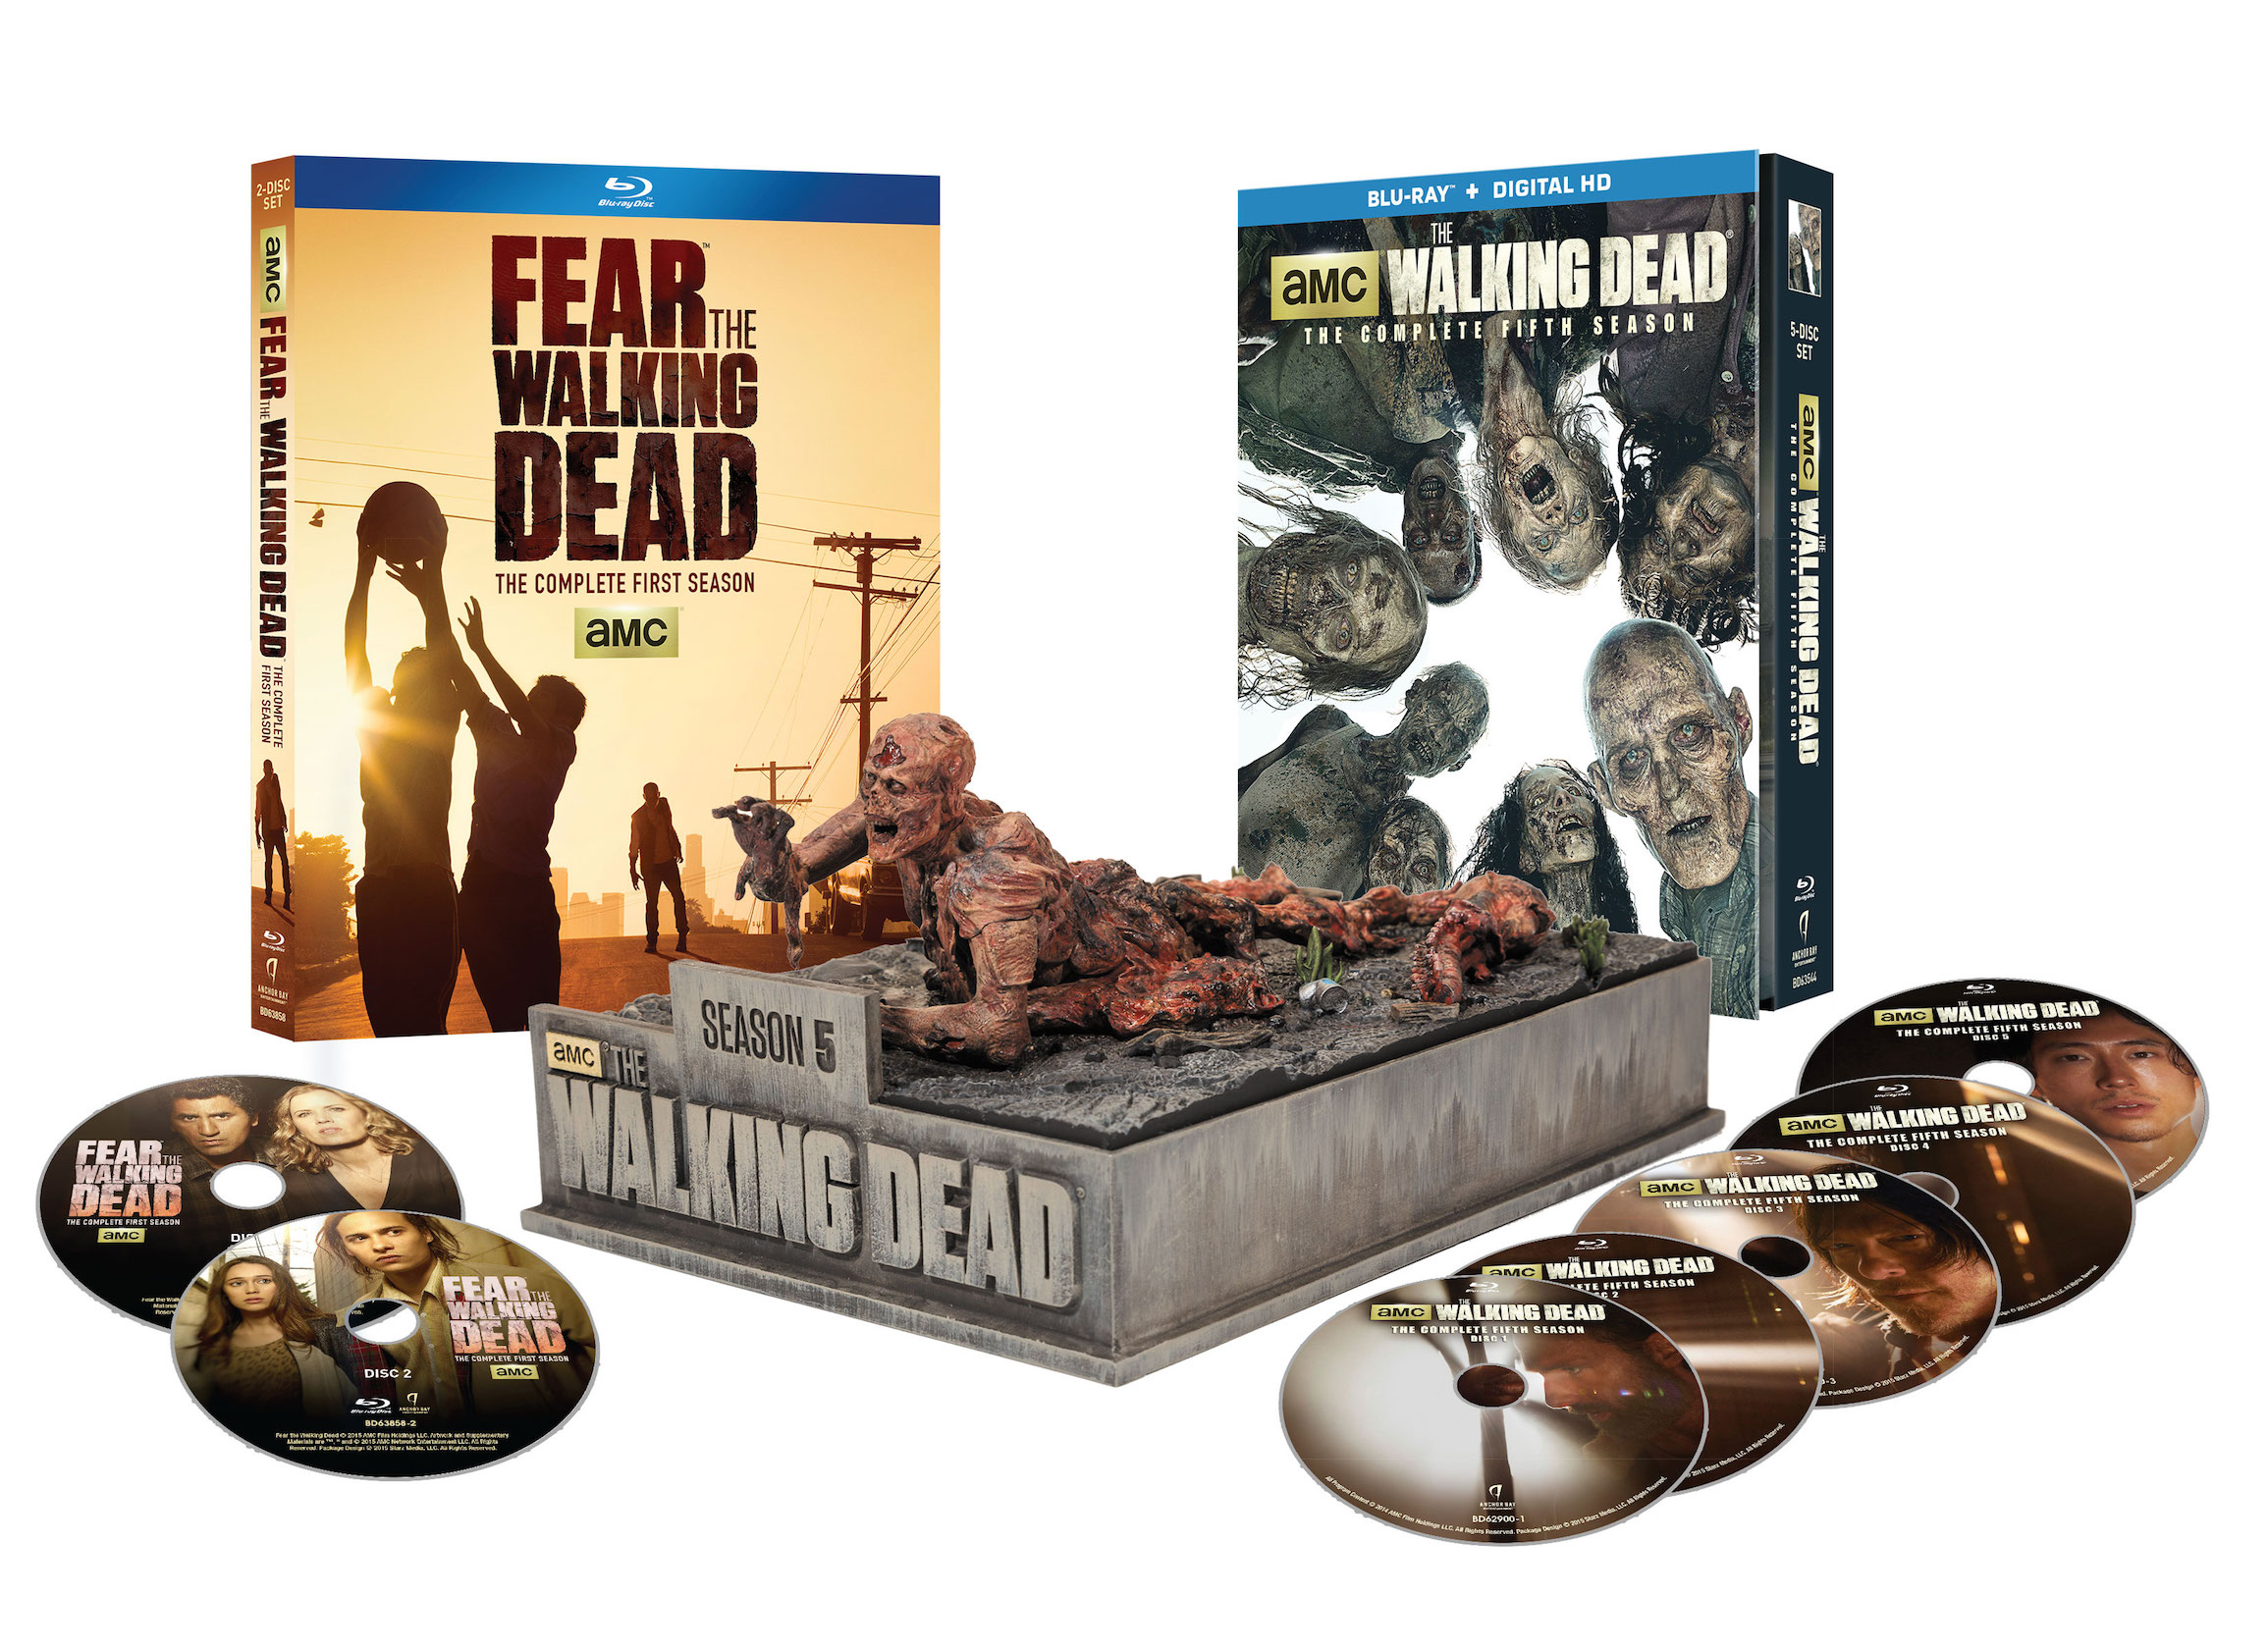 The Walking Dead and Fear the Walking Dead Limited Edition Home Release Sets